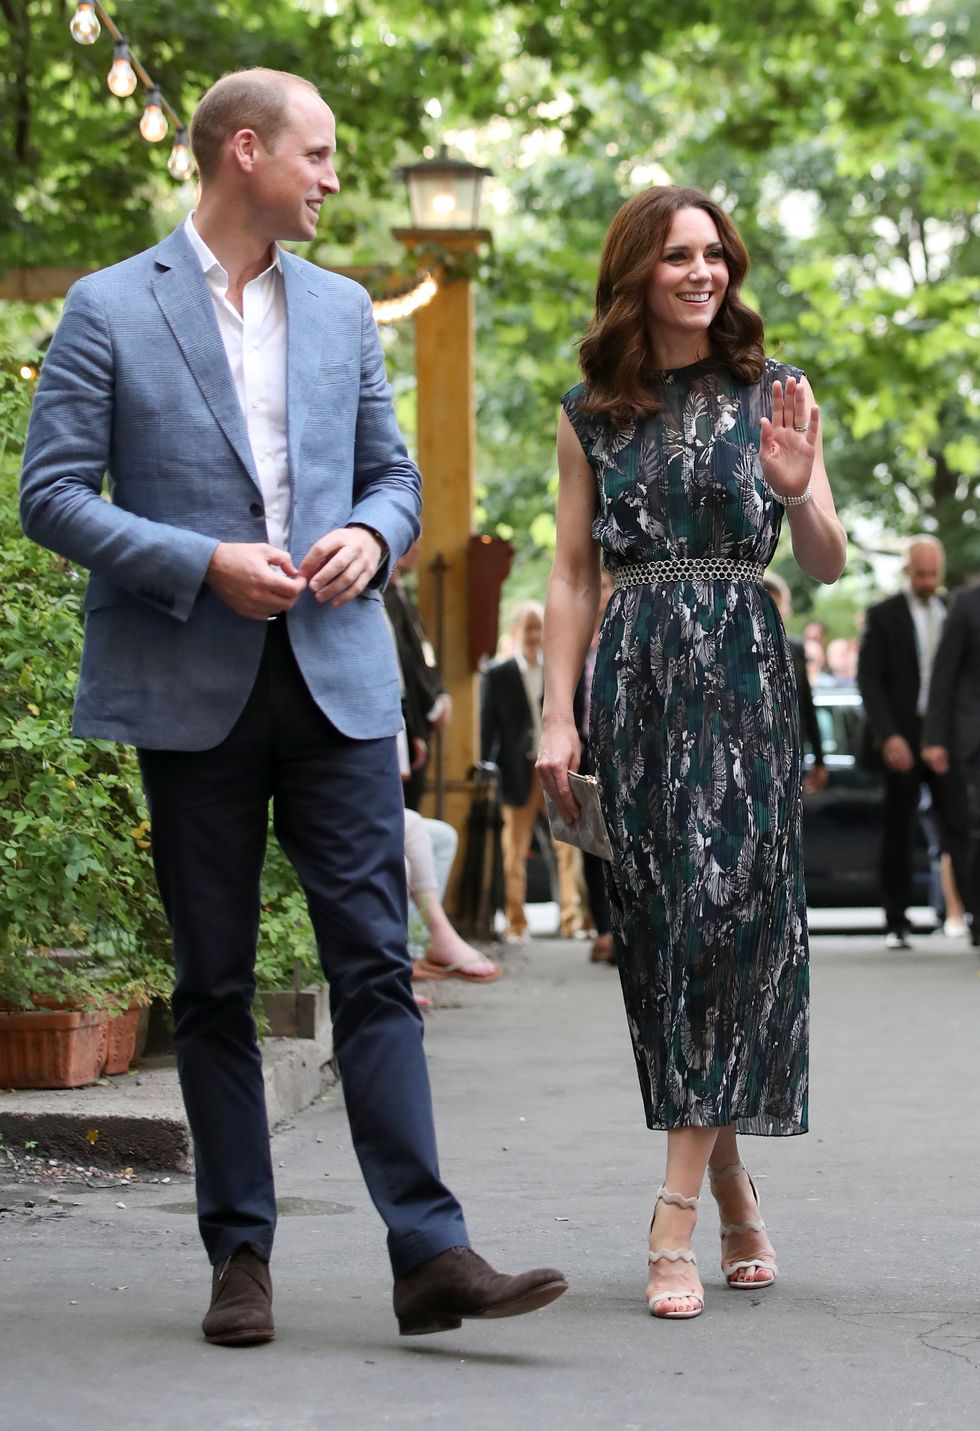 HEIDELBERG, GERMANY - JULY 20:  Prince William, Duke of Cambridge and Catherine, Duchess of Cambridge arrive at the last original dancehall in Berlin, the Clärchens Ballhaus, to attend a reception on day 2 of their official visit to Germany on July 20, 2017 in Berlin, Germany.  (Photo by Chris Jackson - Pool/Getty Images)